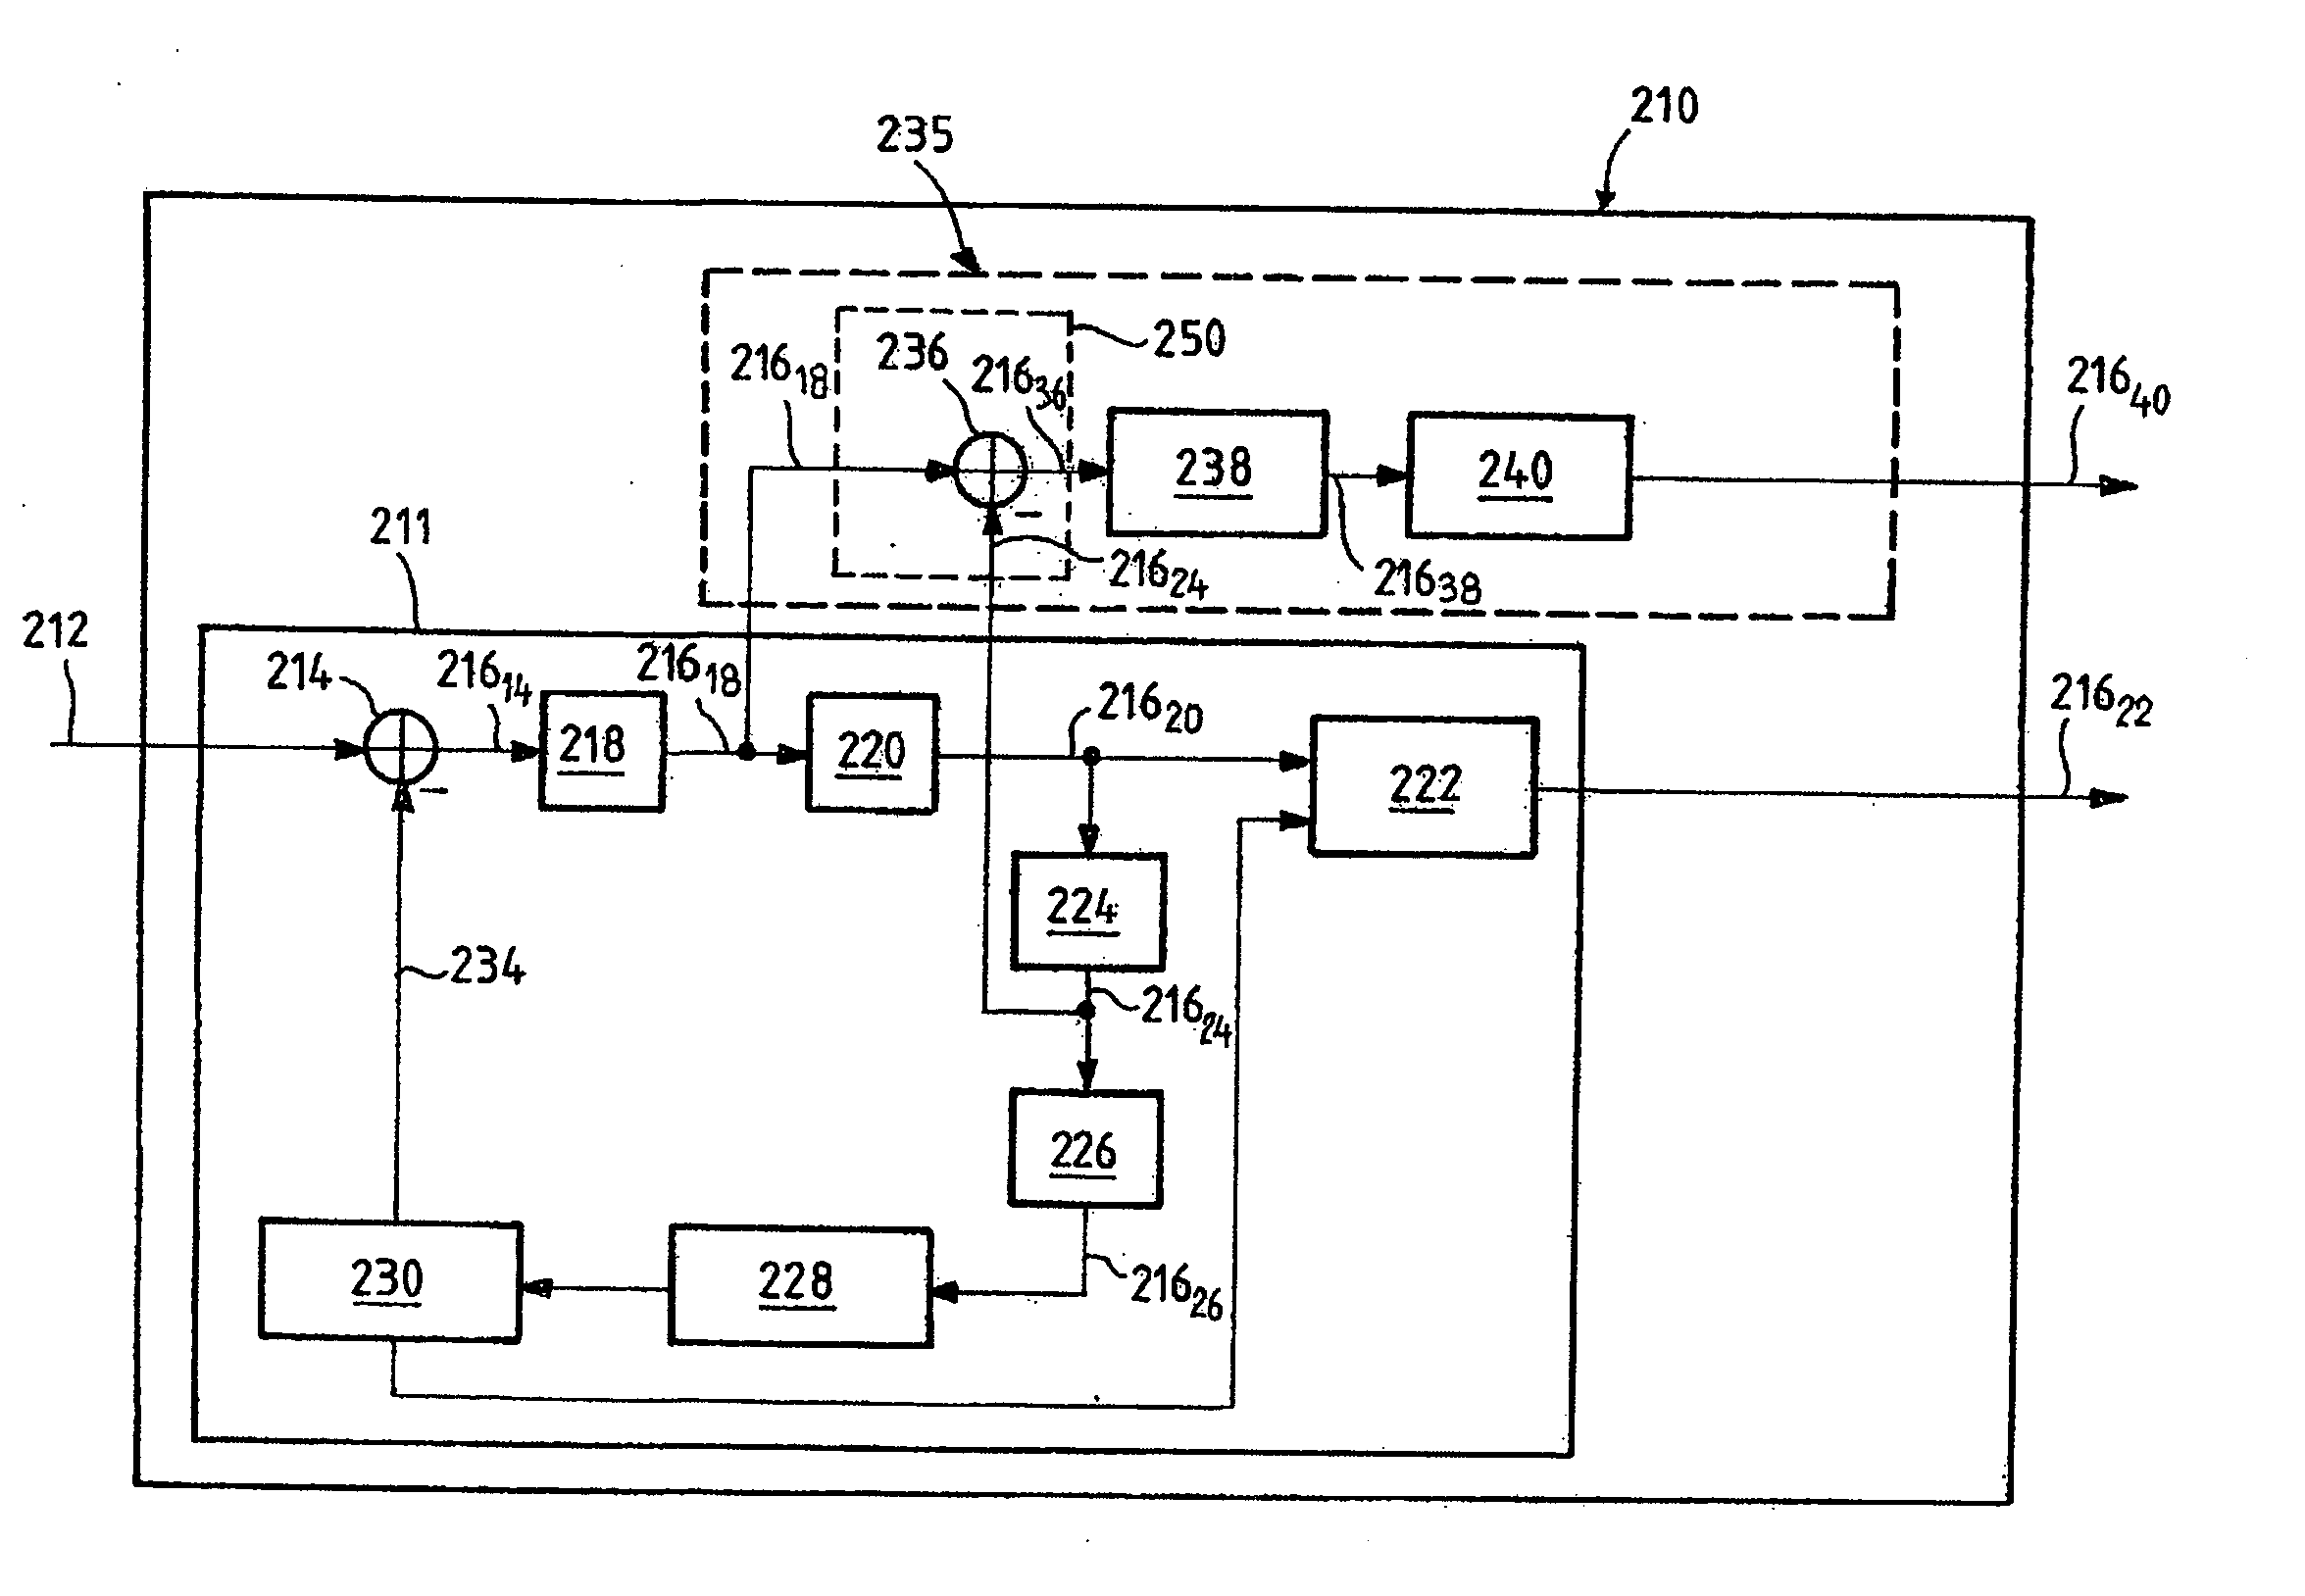 Device and method for compressing digital images